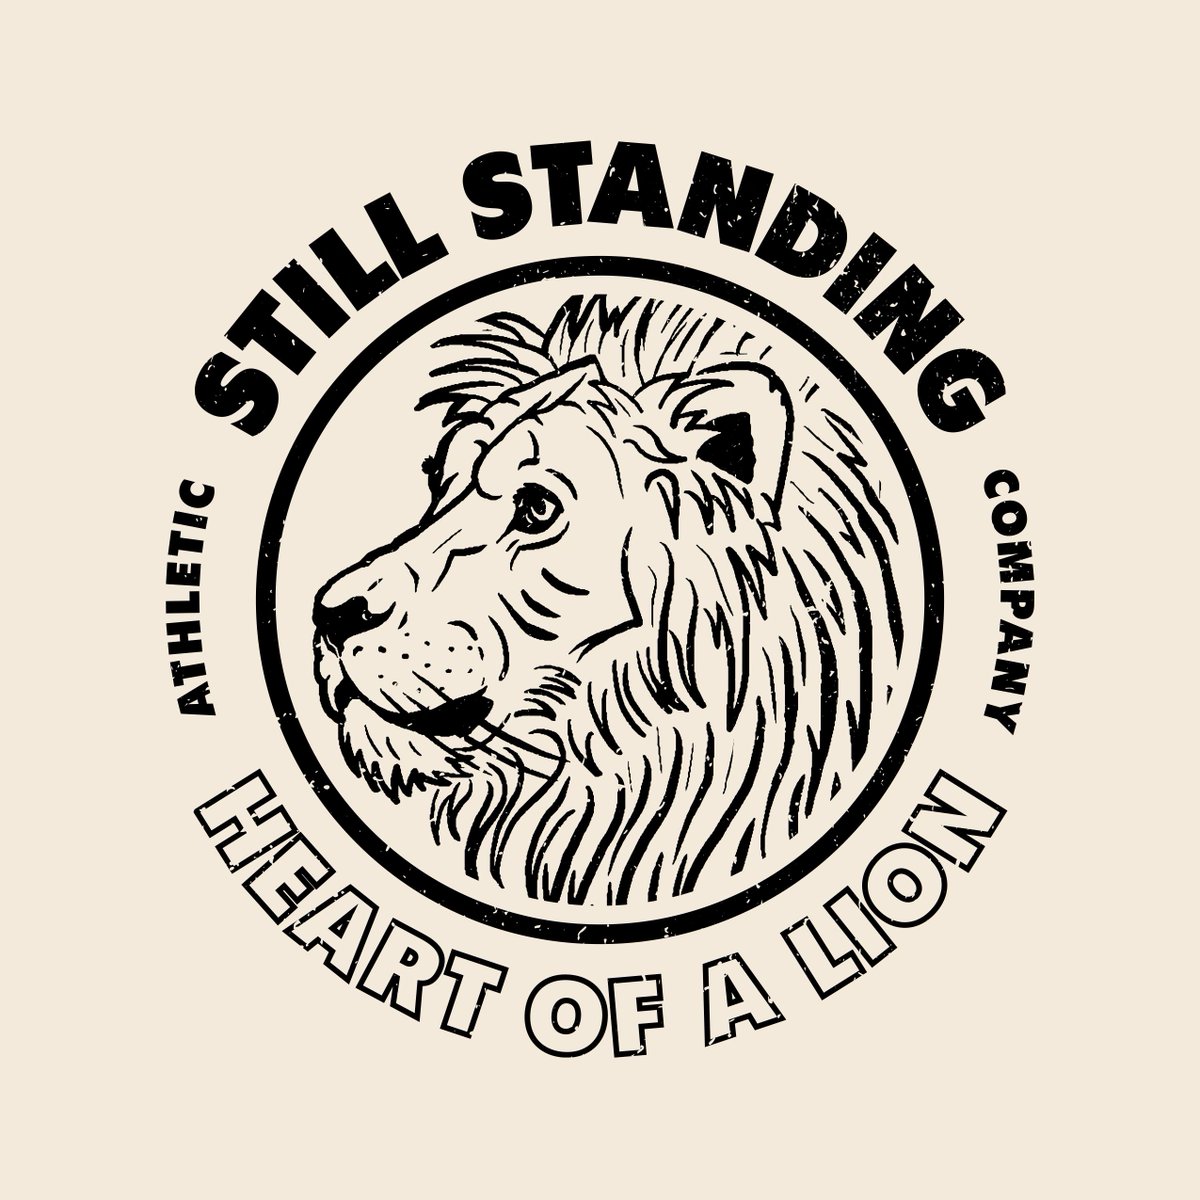 Visit our website to learn more about who we are, what we have to offer, and how we can support you on your journey. #StillStandingAthletics #EverydayWarrior